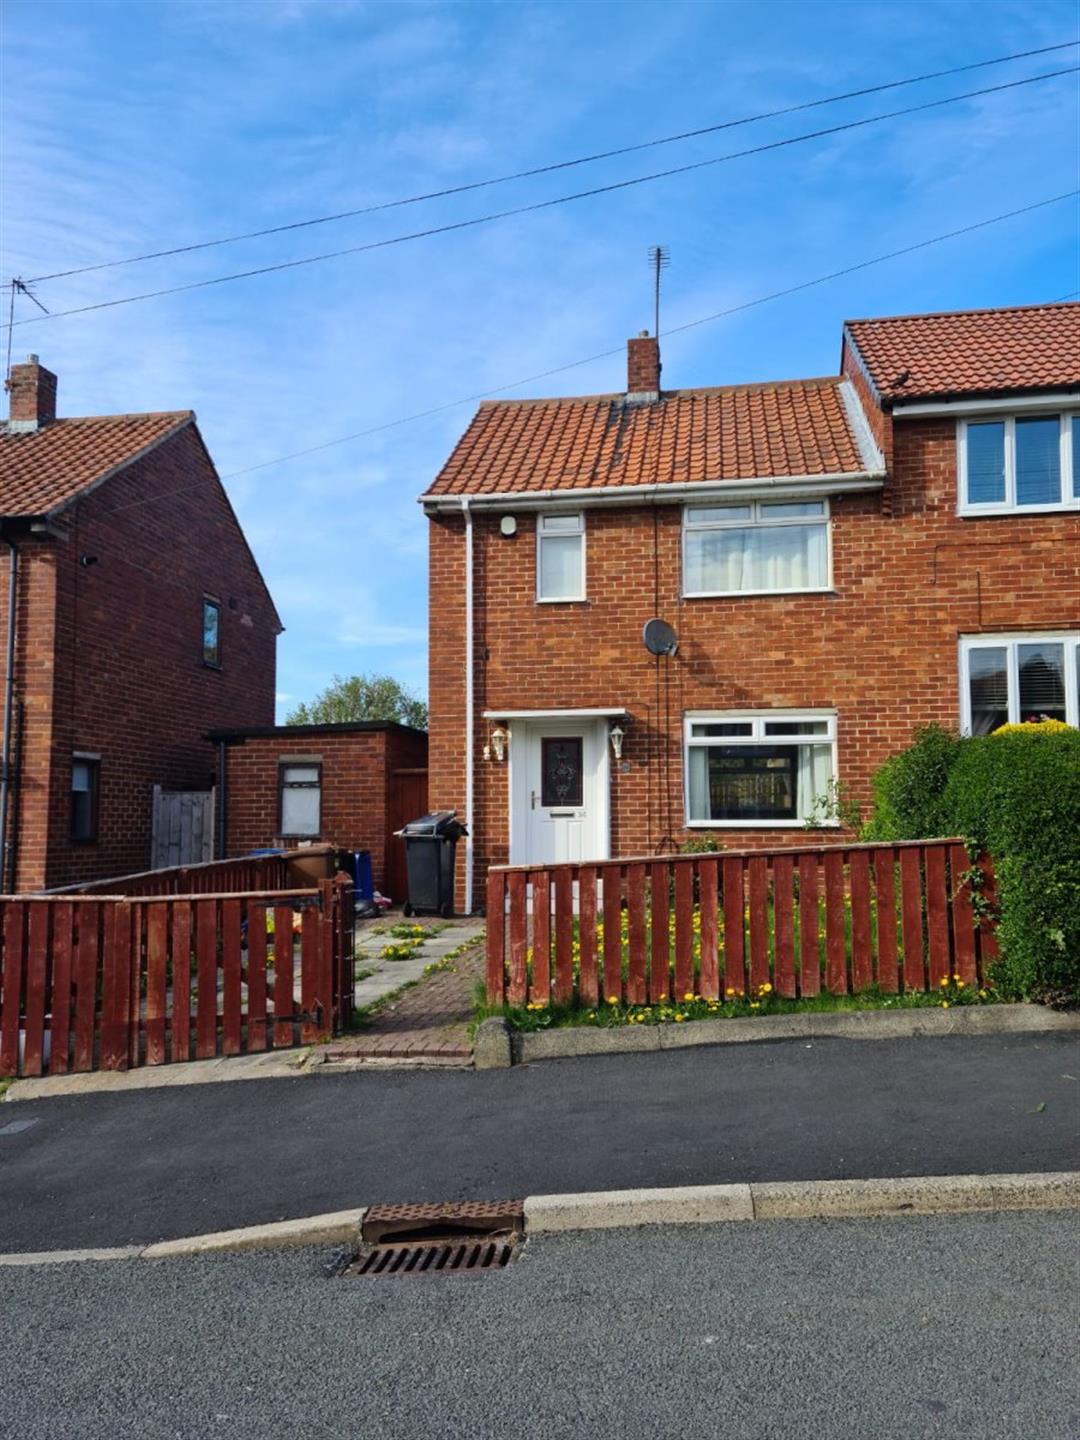 2 bedroom terraced house To Let in Crook - Main Image.